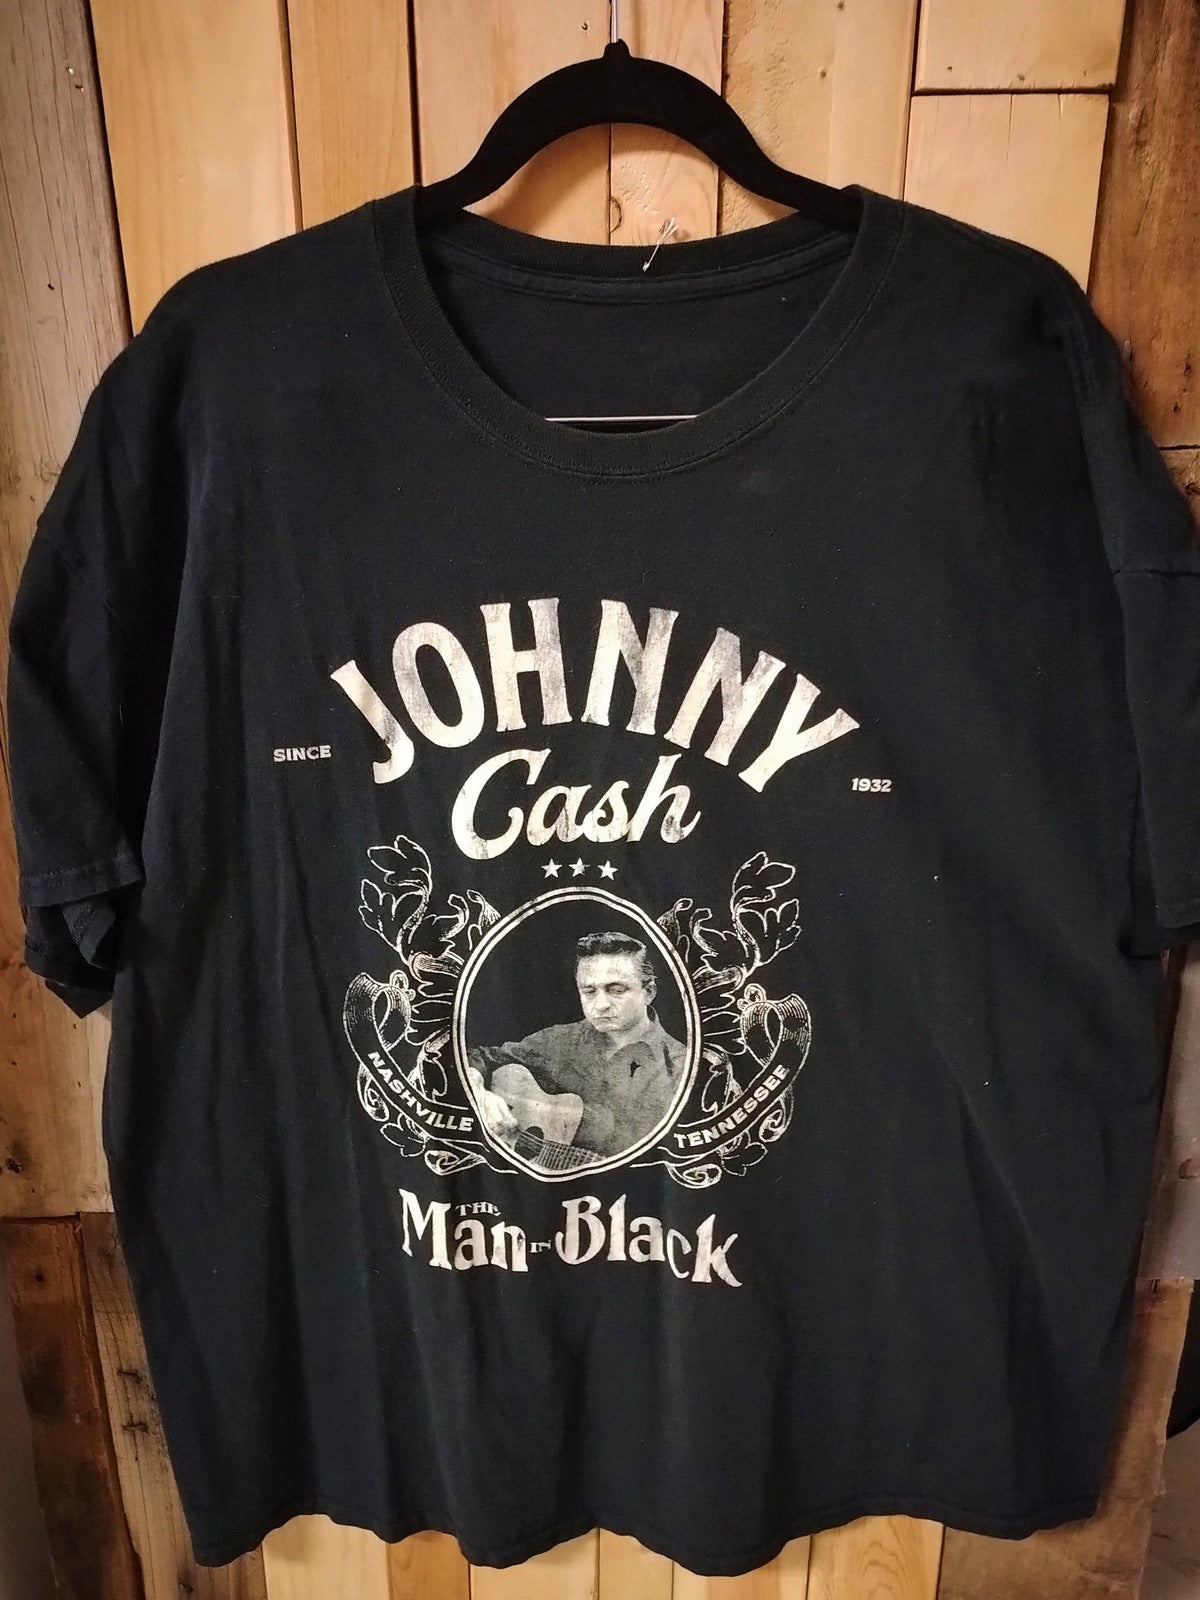 Johnny Cash Official Merchandise "The Man in Black" T Shirt Size 2XL